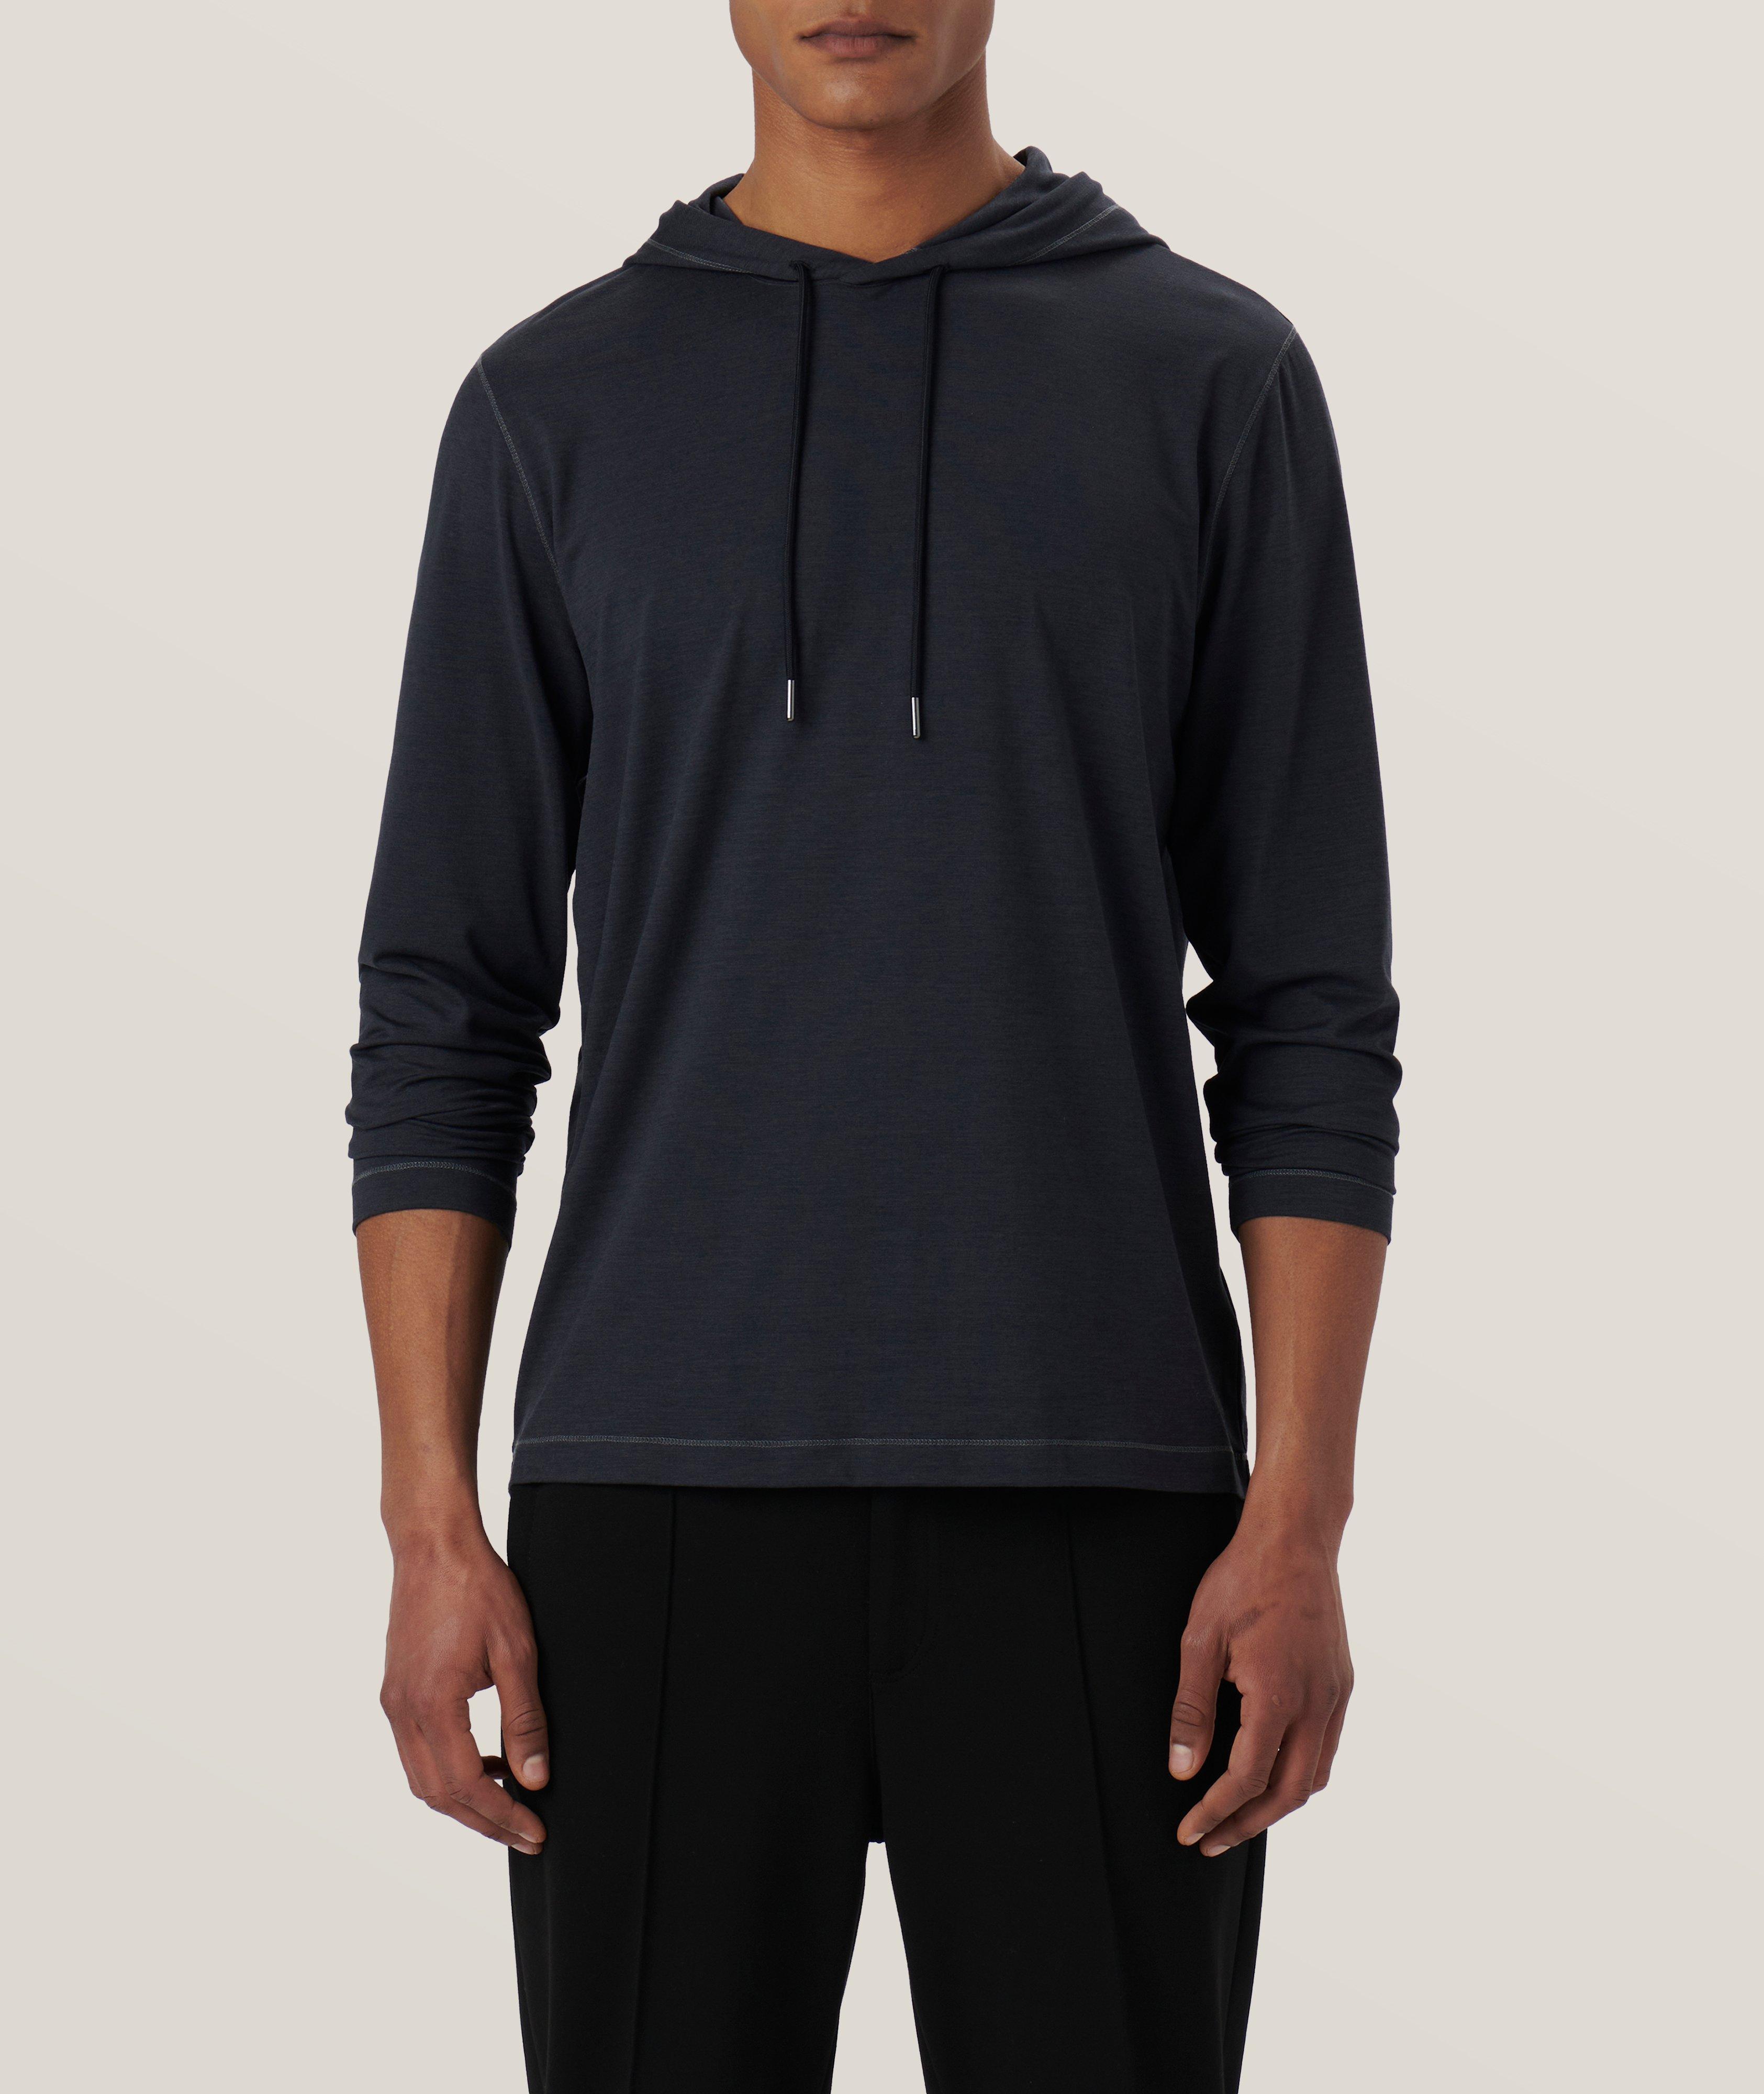 UV50 Performance Stretch-Fabric Hooded Sweater image 2